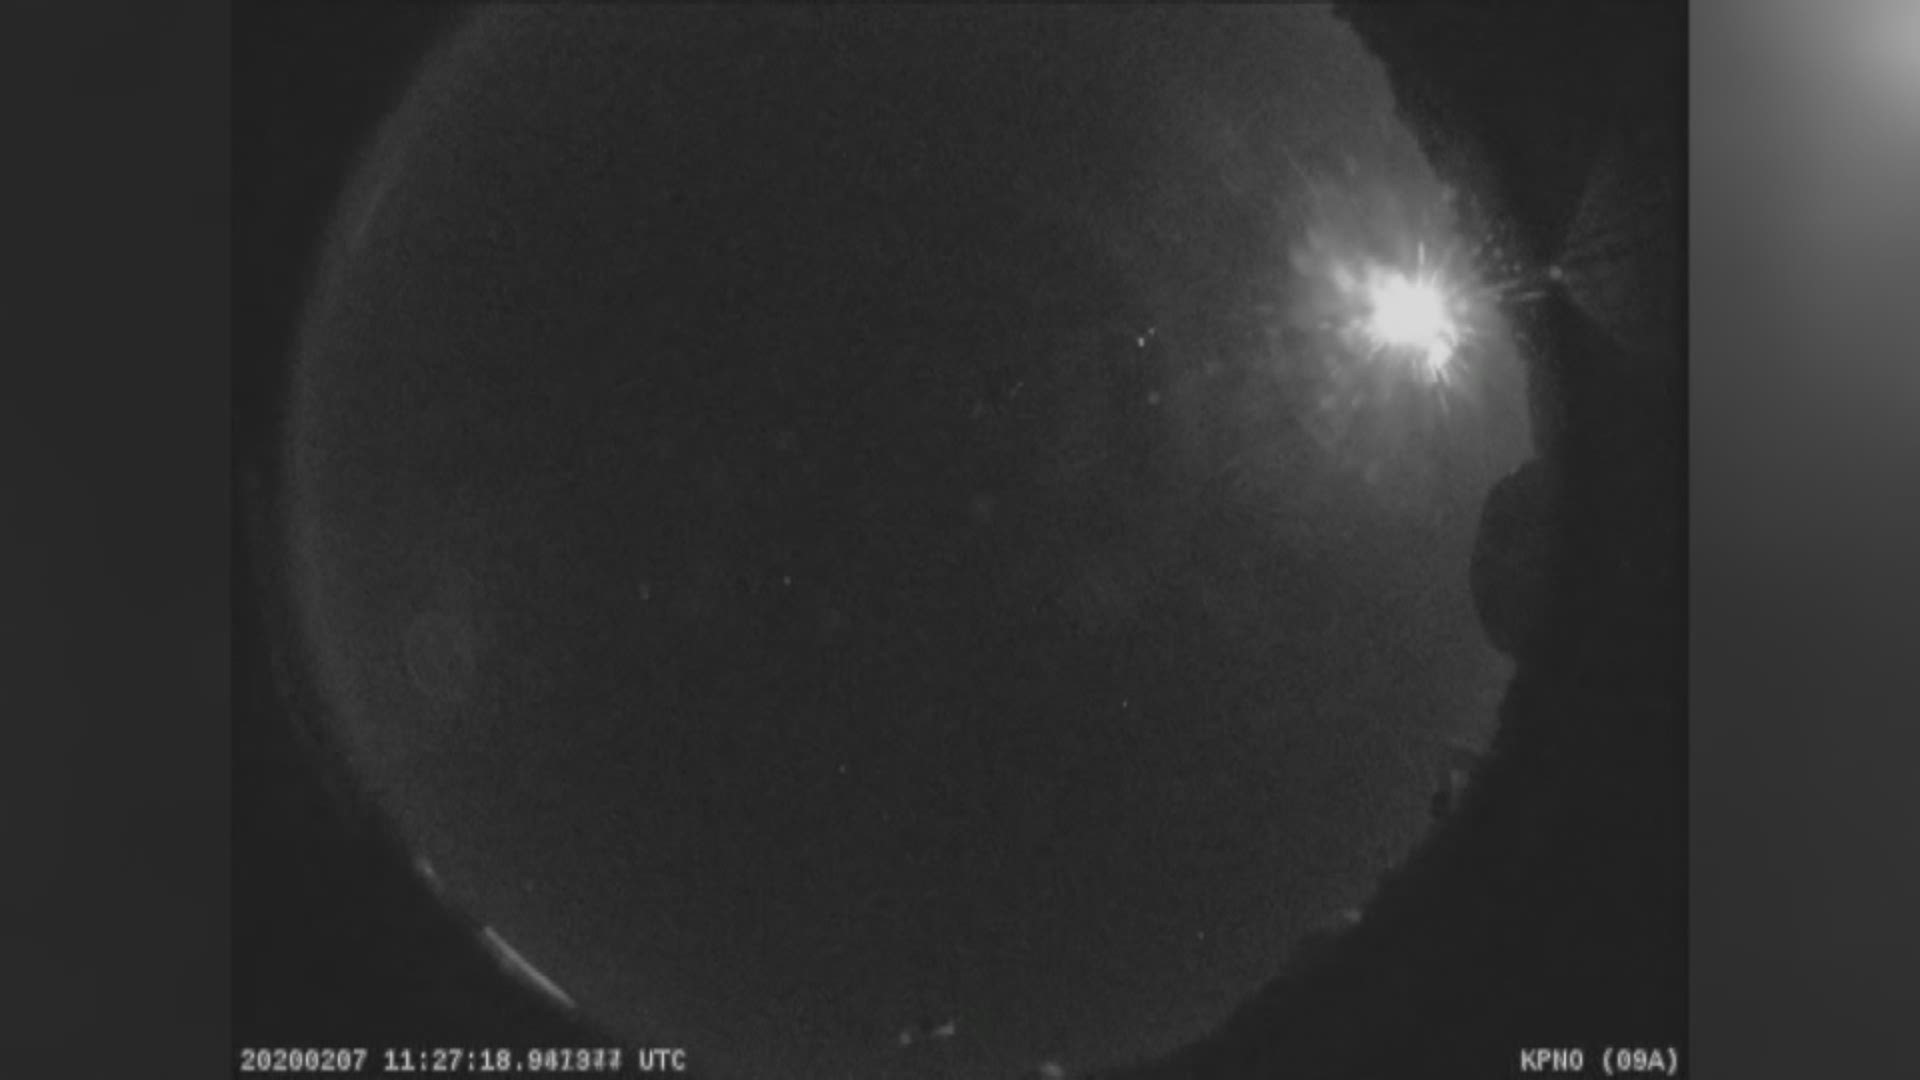 NASA's All Sky Fireball Network appears to have captured video of a meteor seen by many across Georgia on Friday.